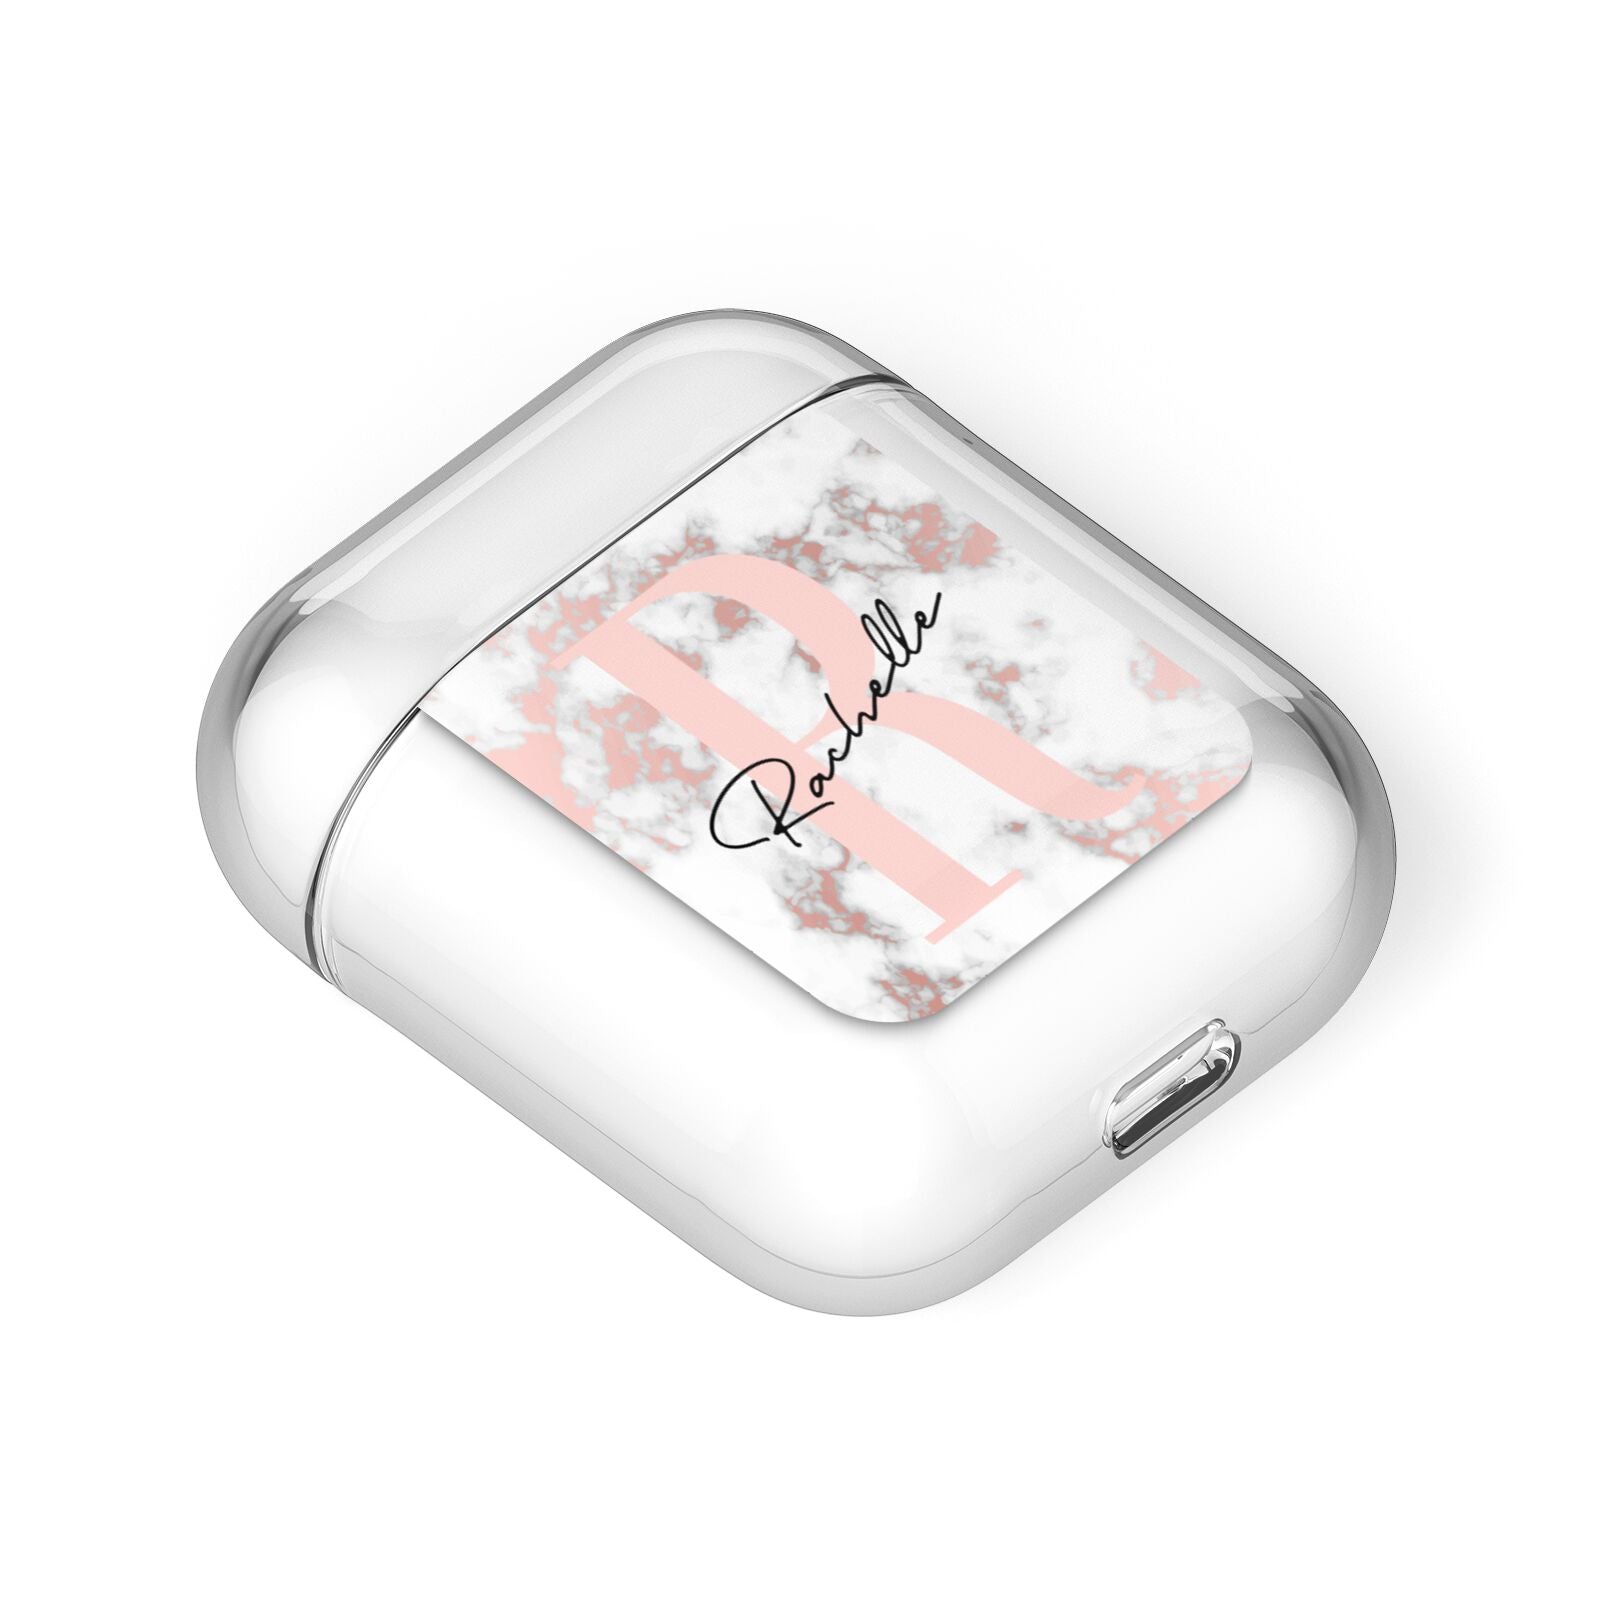 Monogrammed Rose Gold Marble AirPods Case Laid Flat